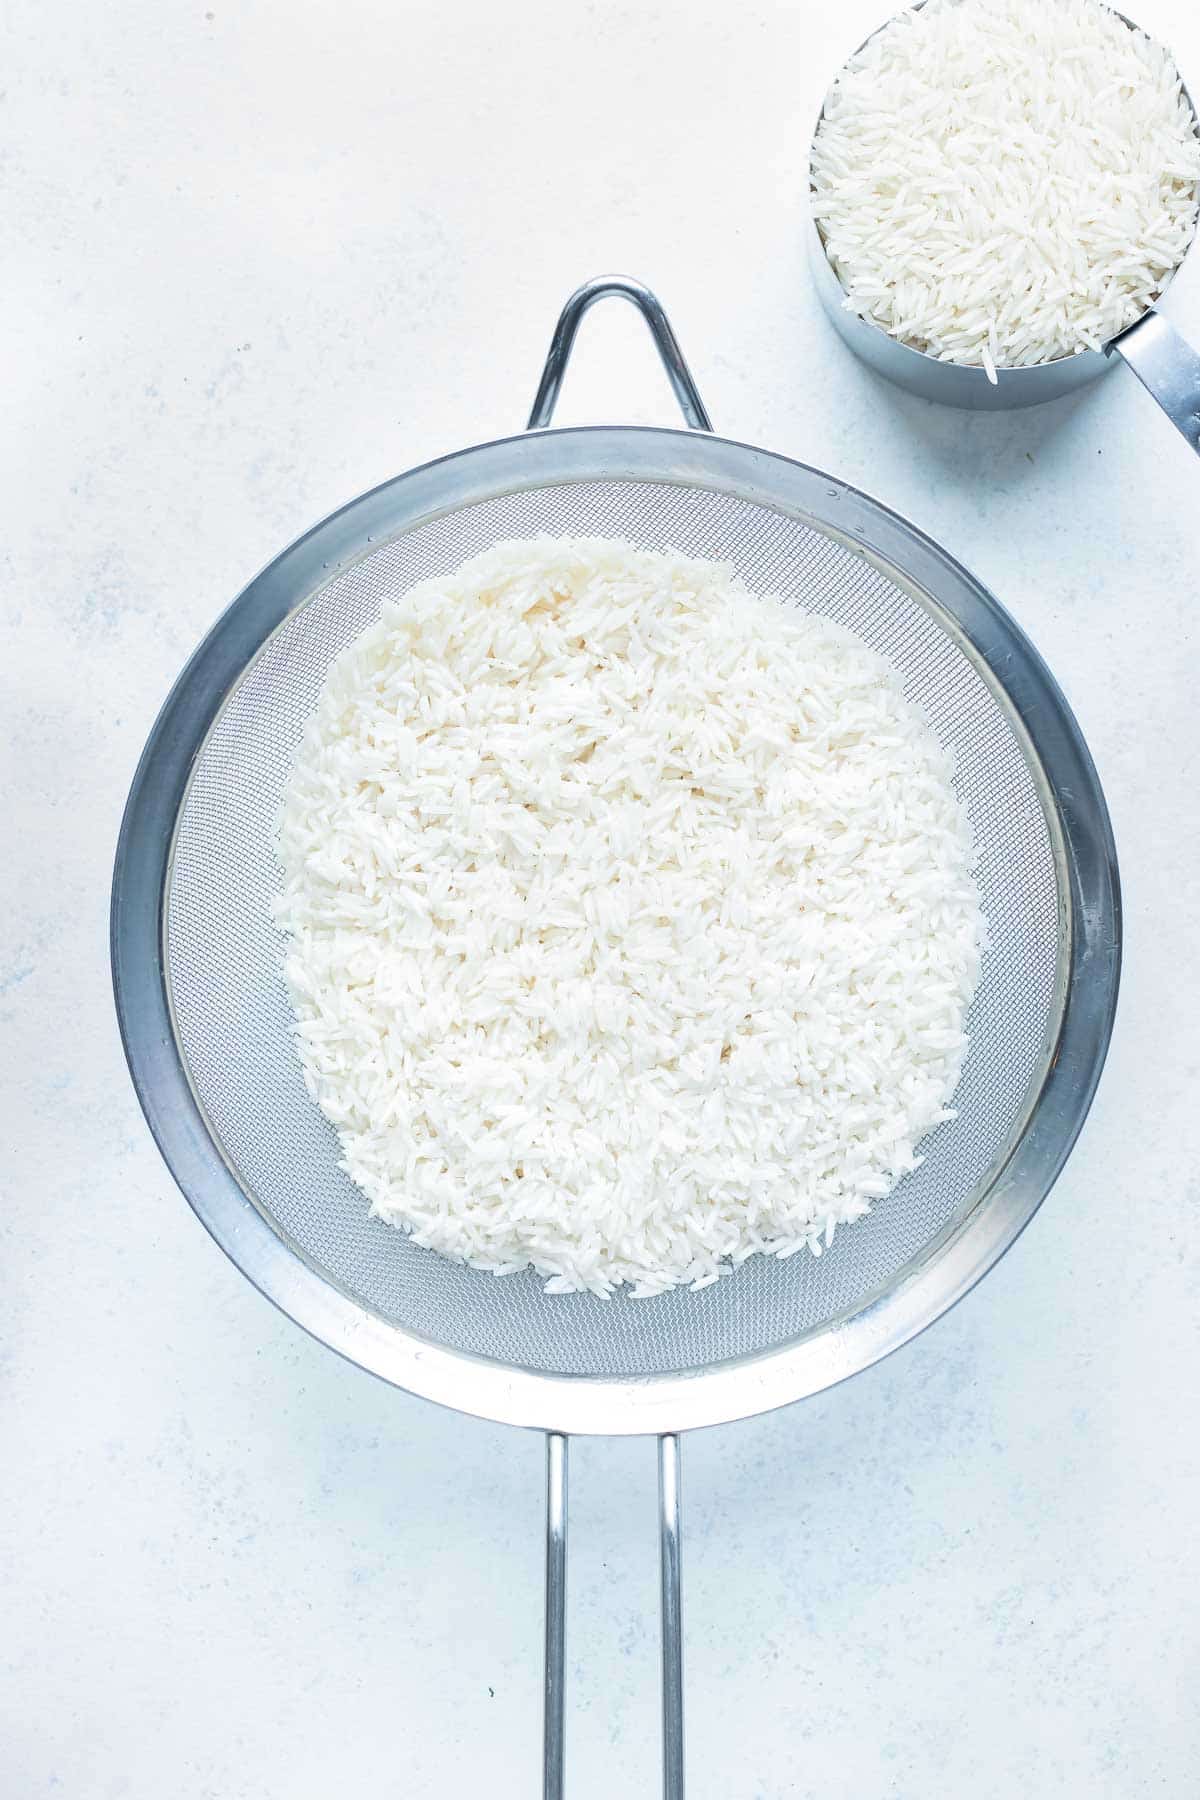 Rice is rinsed in a strainer before cooking in the instant pot.